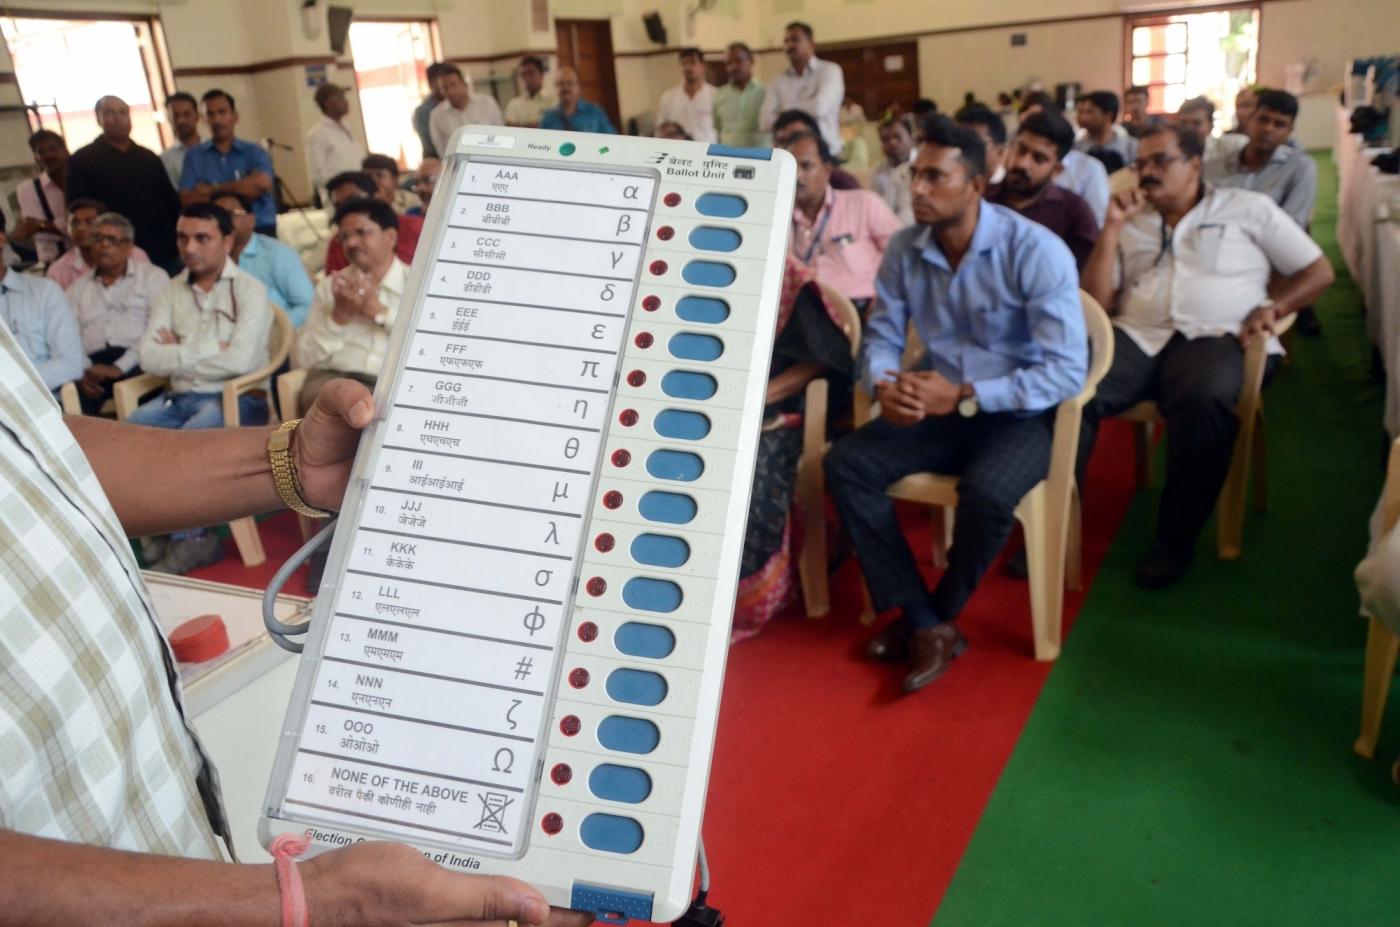 Mumbai: Election officials demonstrate the functioning of an Electronic Voting Machine (EVM) and Voter Verified Paper Audit Trail (VVPAT) ahead of 2019 Lok Sabha polls during a voter awareness programme in Mumbai, on April 10, 2019. (Photo: IANS) by .